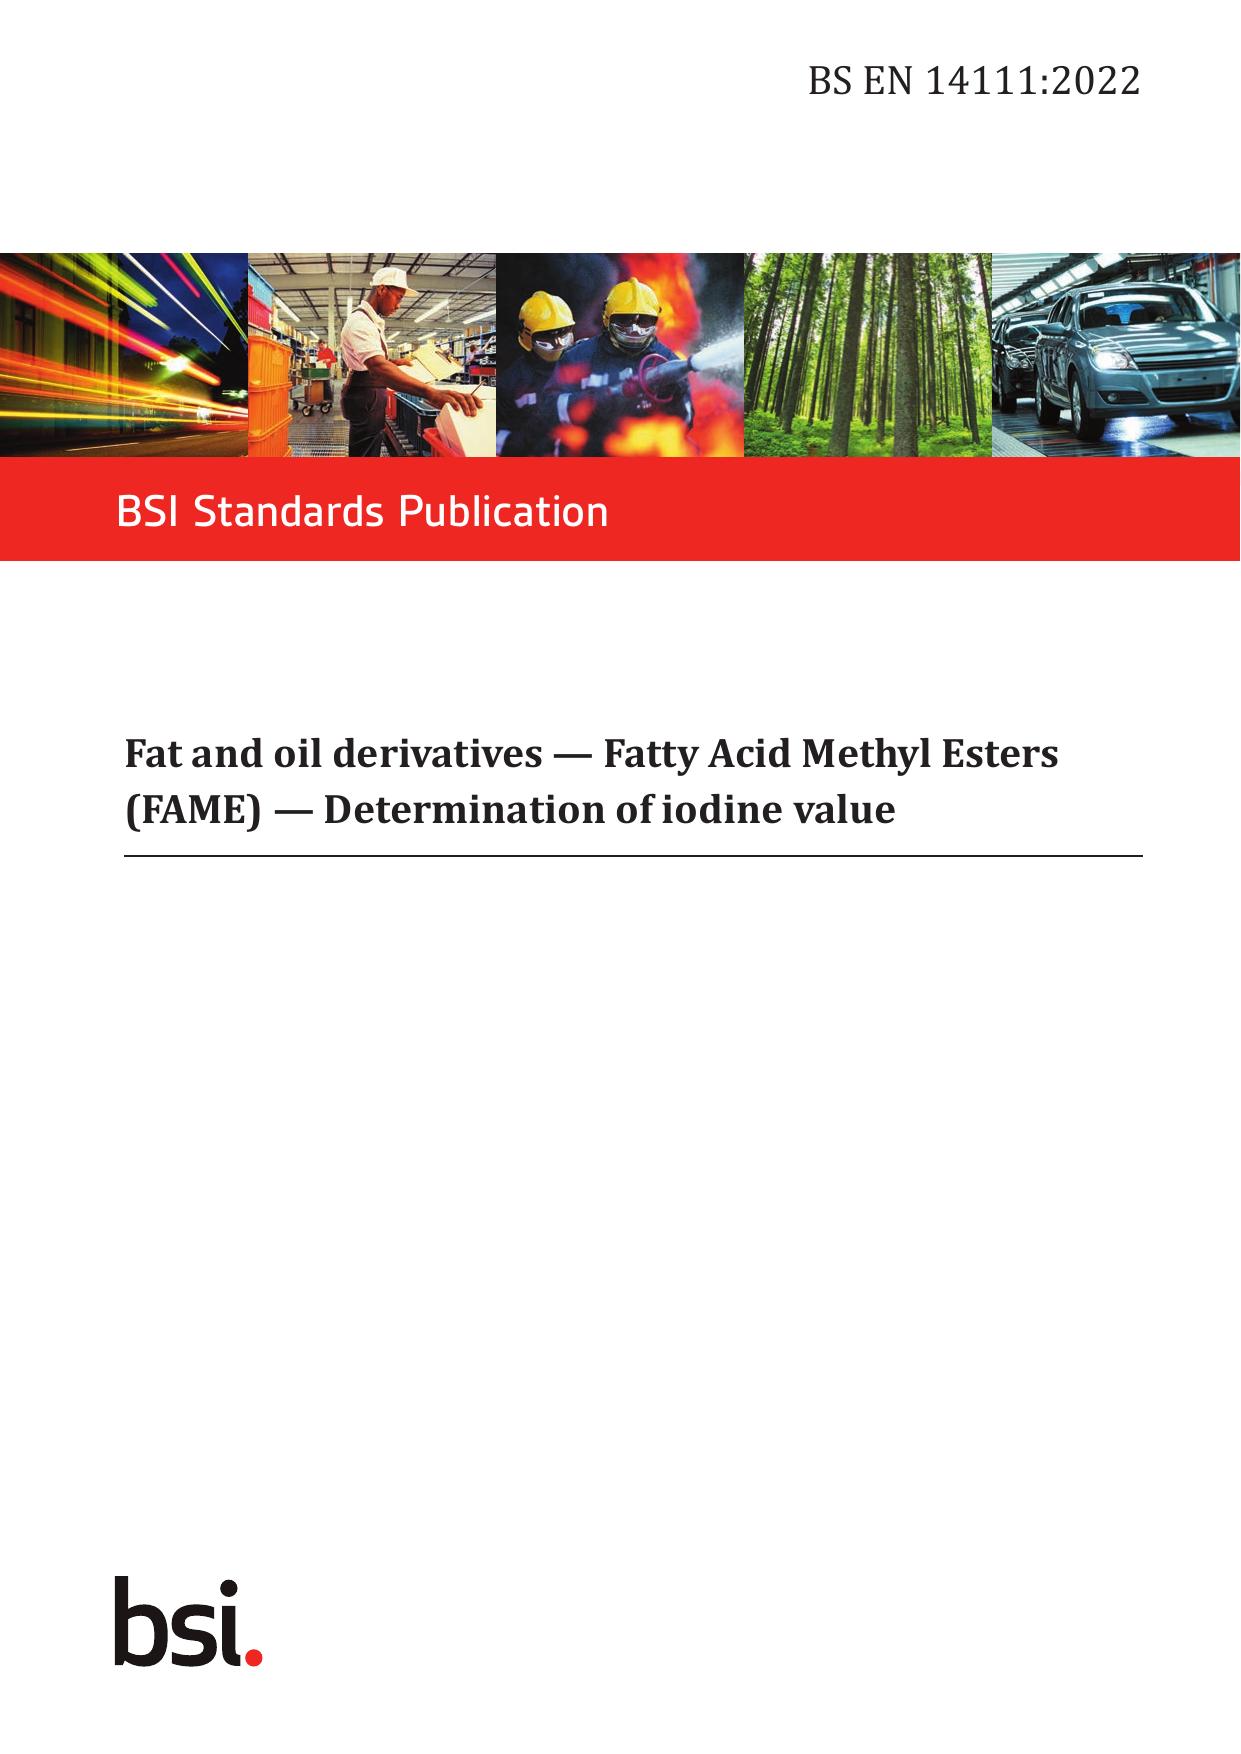 BS EN 14111:2022 by The British Standards Institution